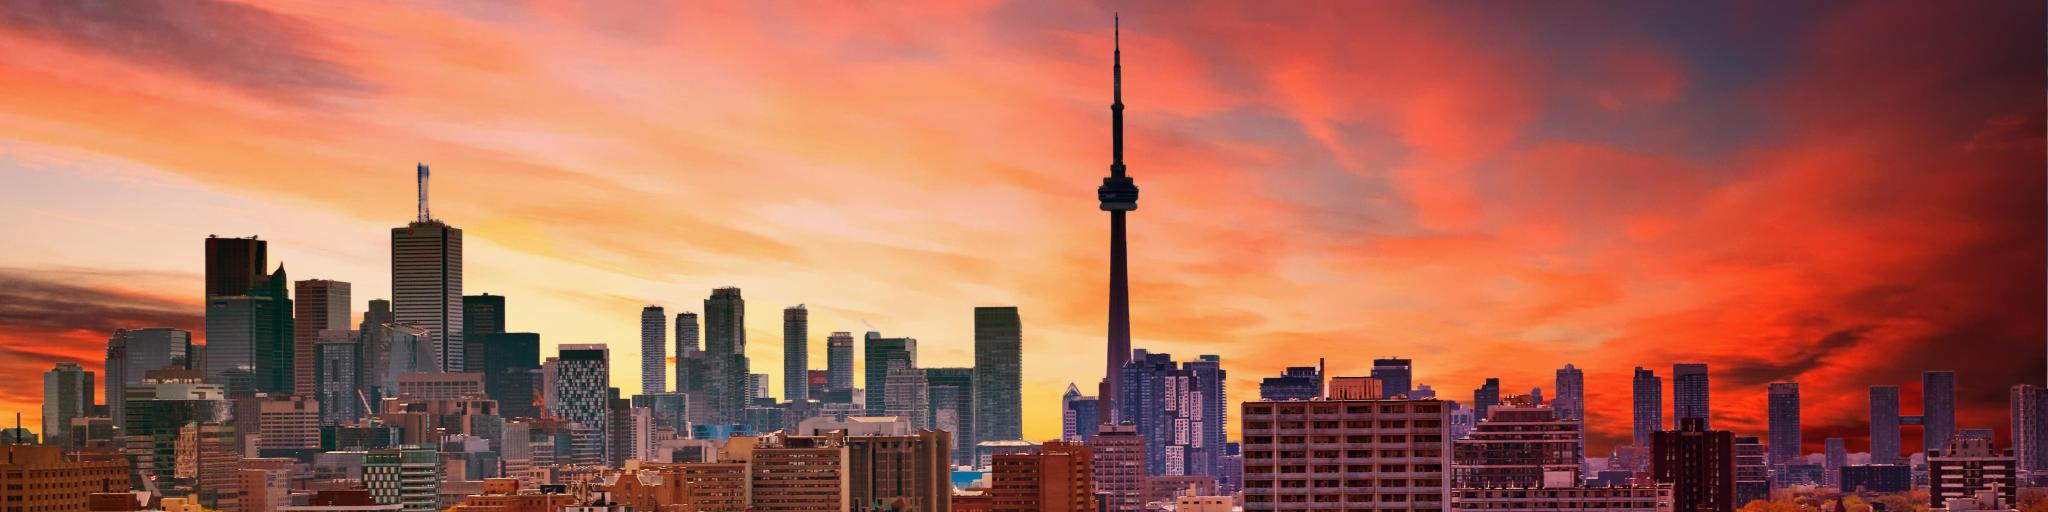 Sunset over Toronto Skyline with red and orange hues and the CN Tower in the center